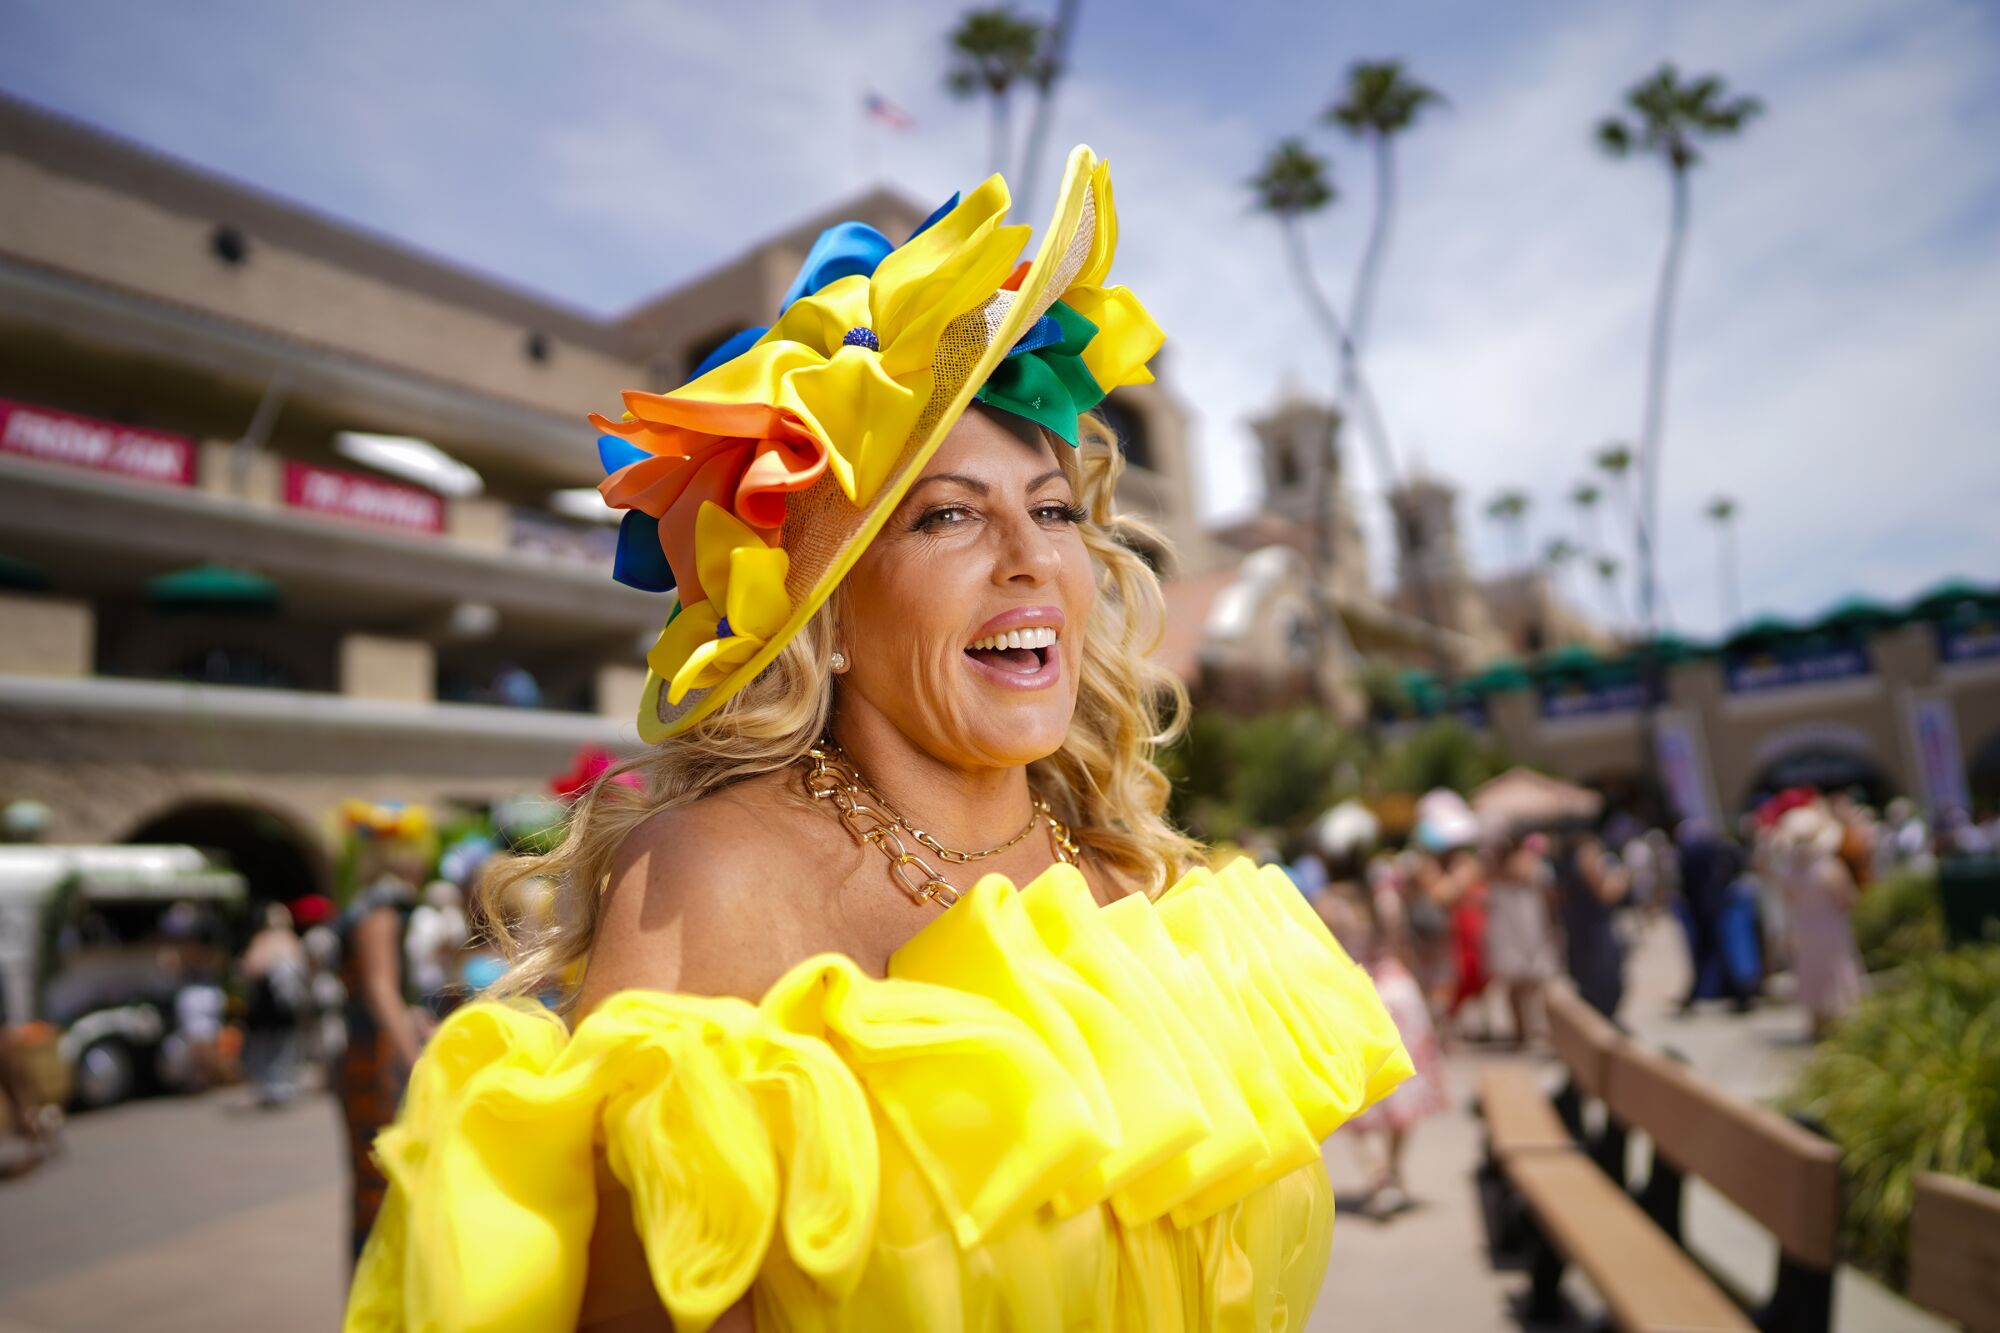 Deena Von Yokes was among the race fans taking part in the tradition of wearing hats on opening day.